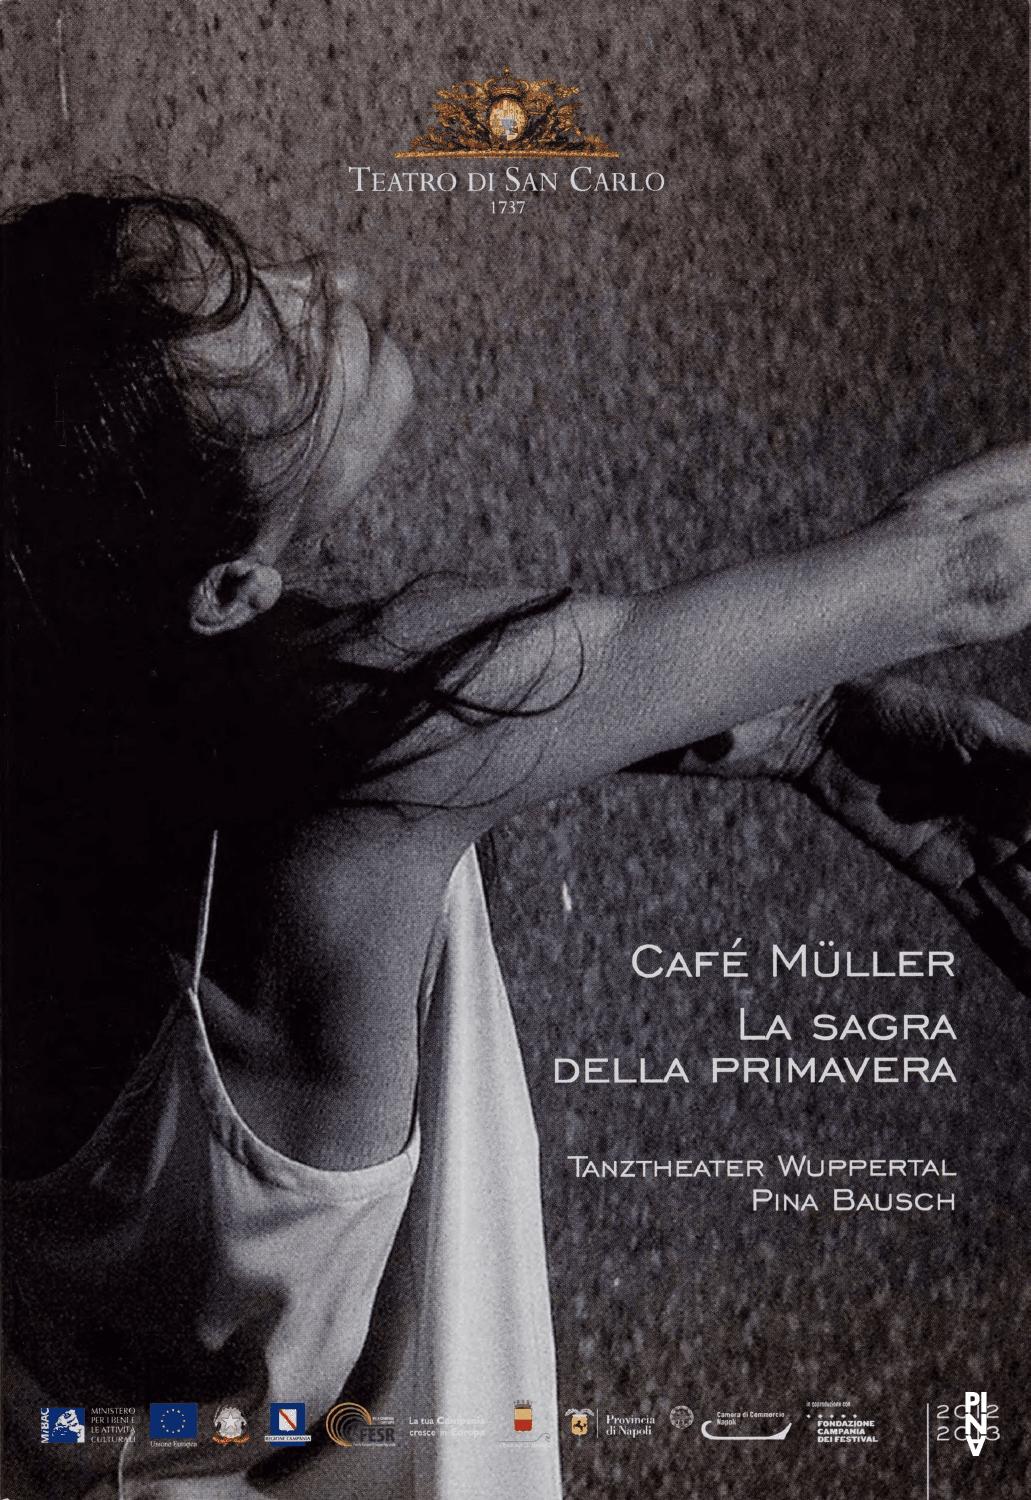 Booklet for “Café Müller” and “The Rite of Spring” by Pina Bausch with Tanztheater Wuppertal in in Naples, 07/11/2013 – 07/14/2013